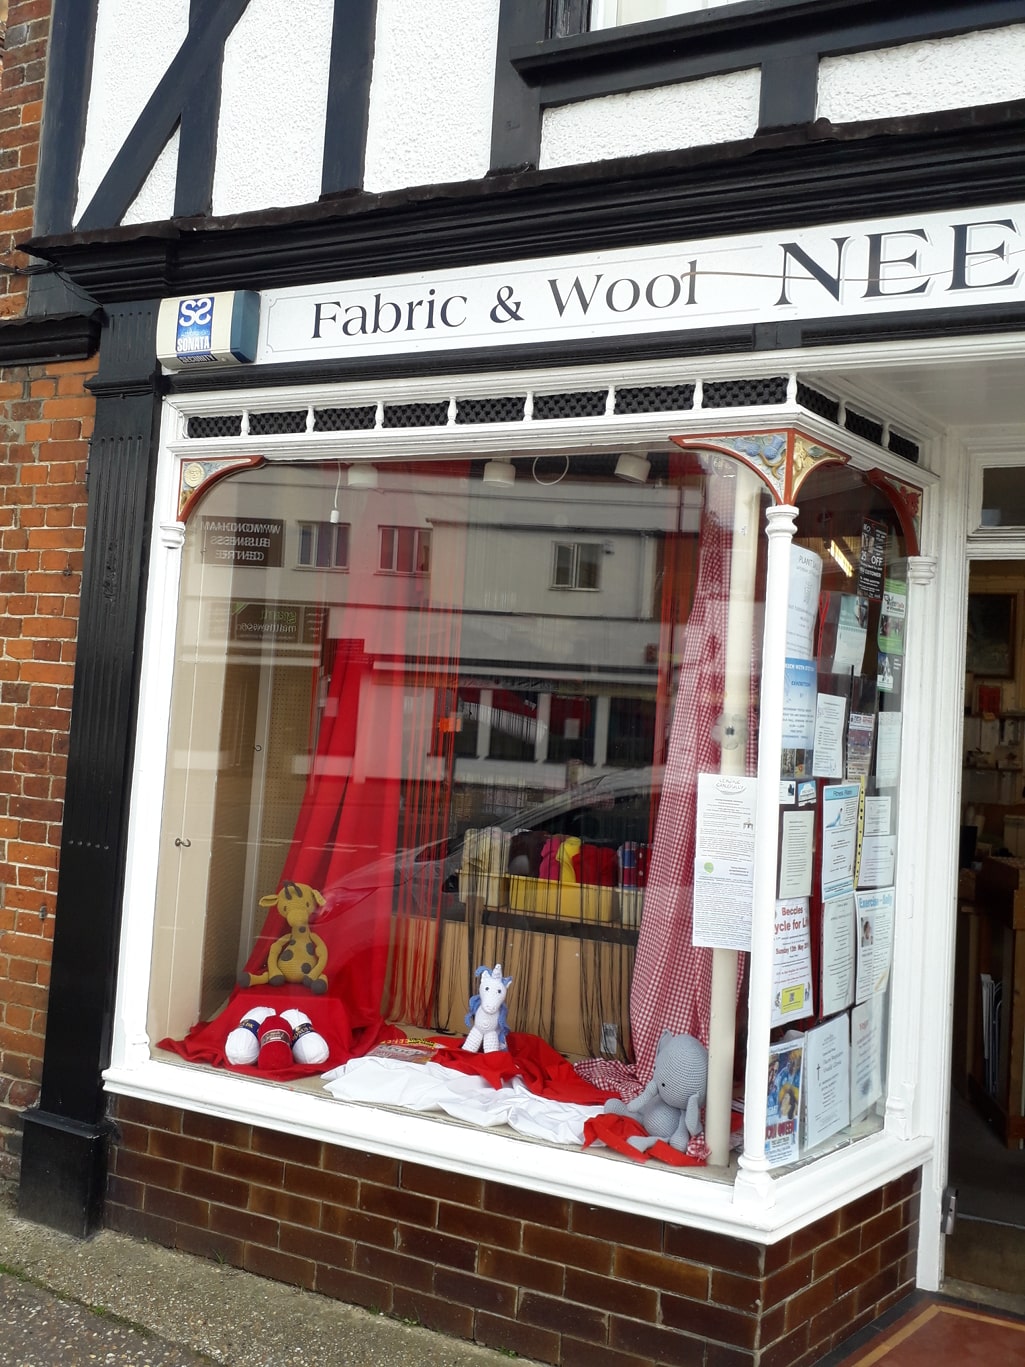 Needlecraft shop with St George's Day decoration